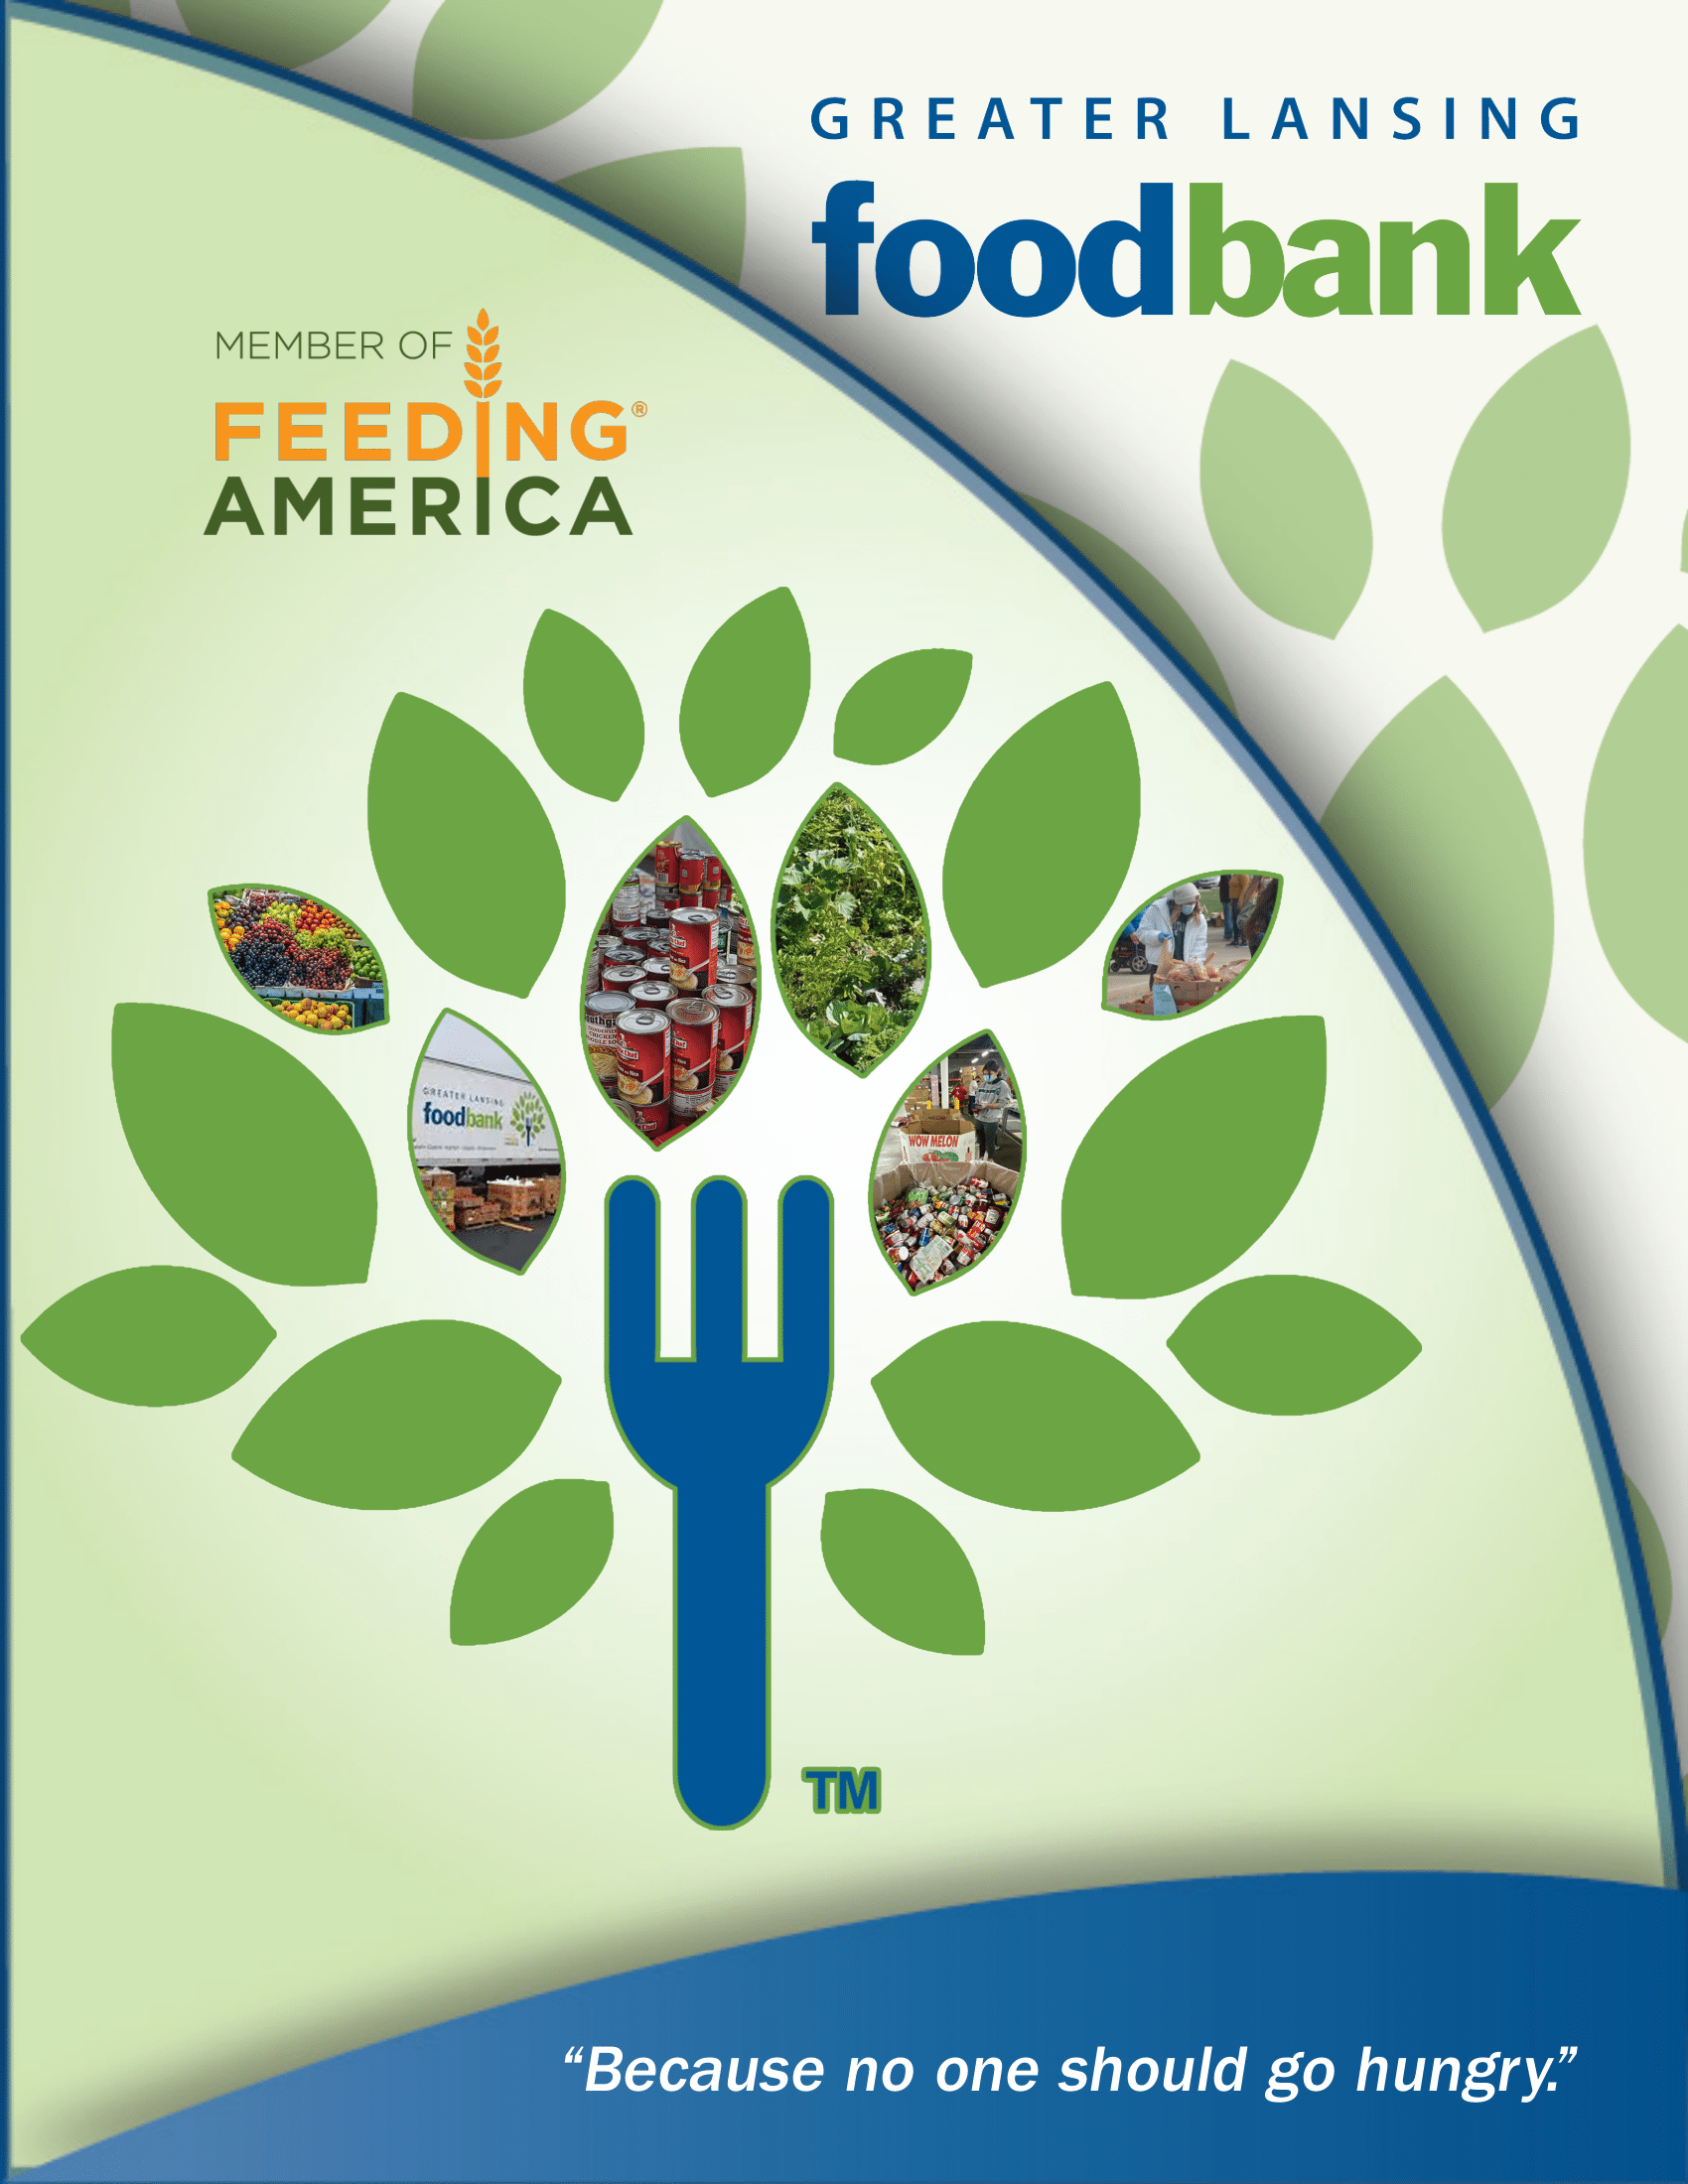 Cover Image of a Booklet that states "Greater Lansing Food Bank, member of Feeding America" with the quote "Because no one should go hungry."